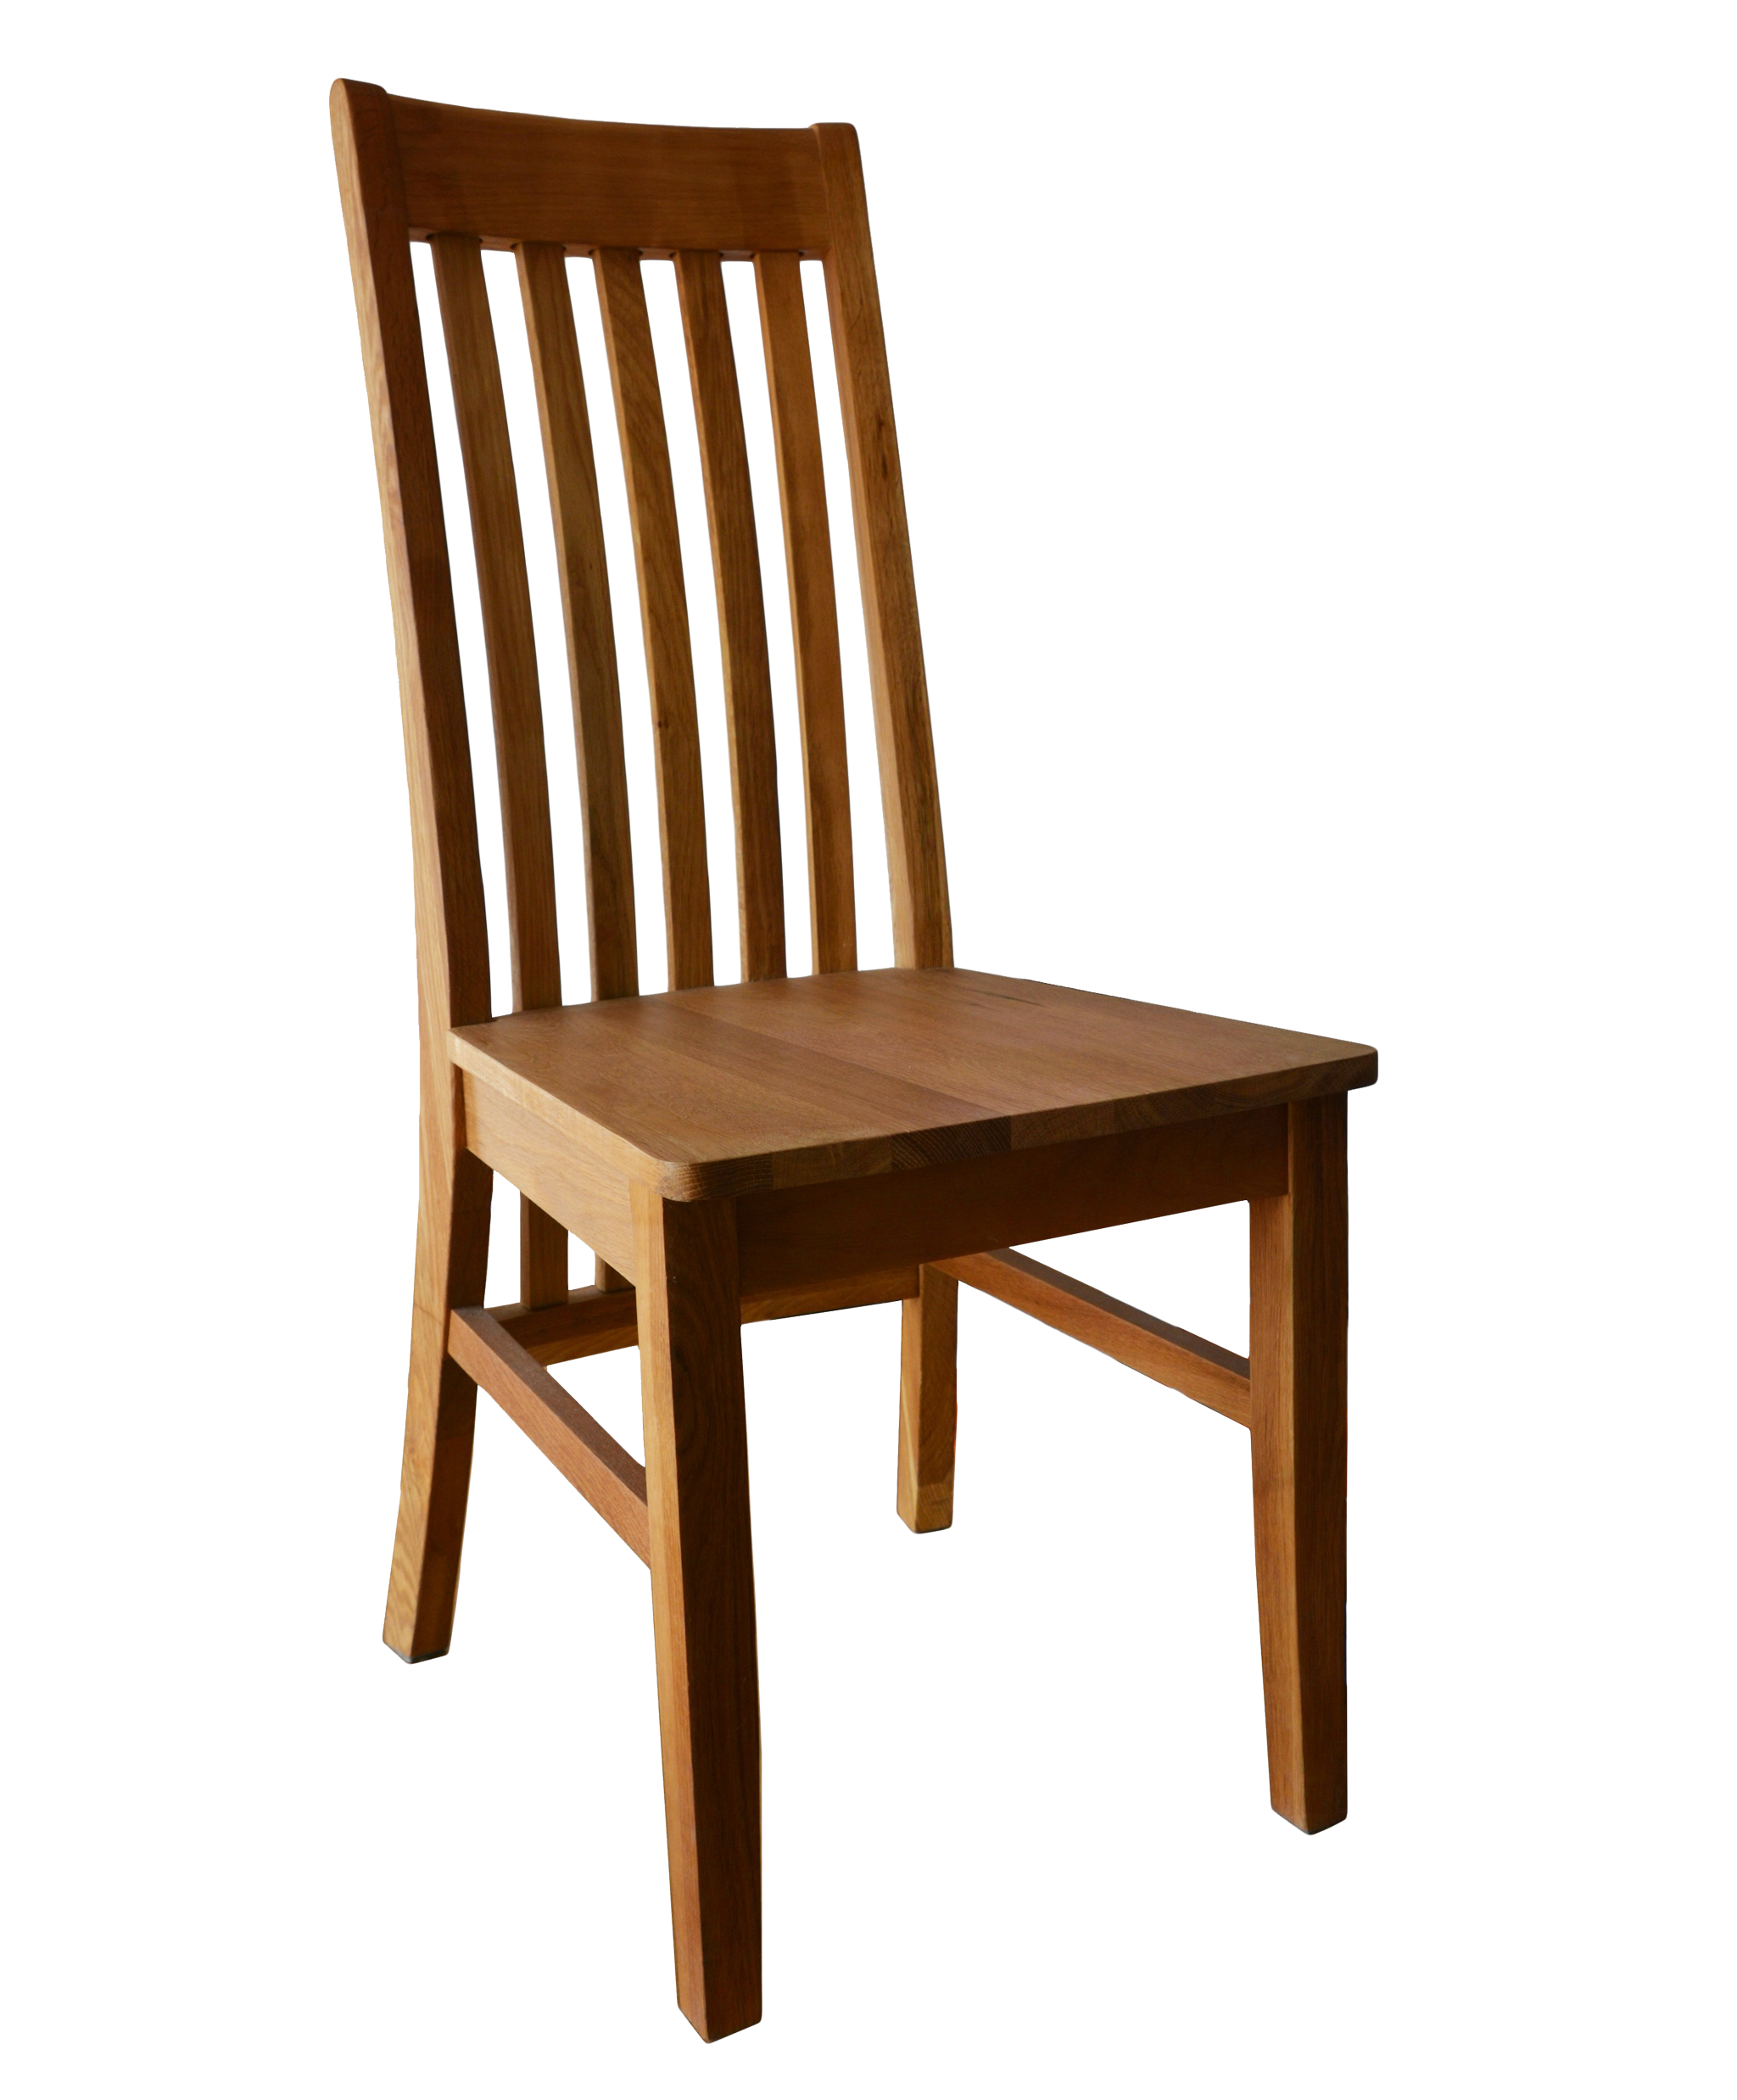 Kitchen chair (Shopware product)